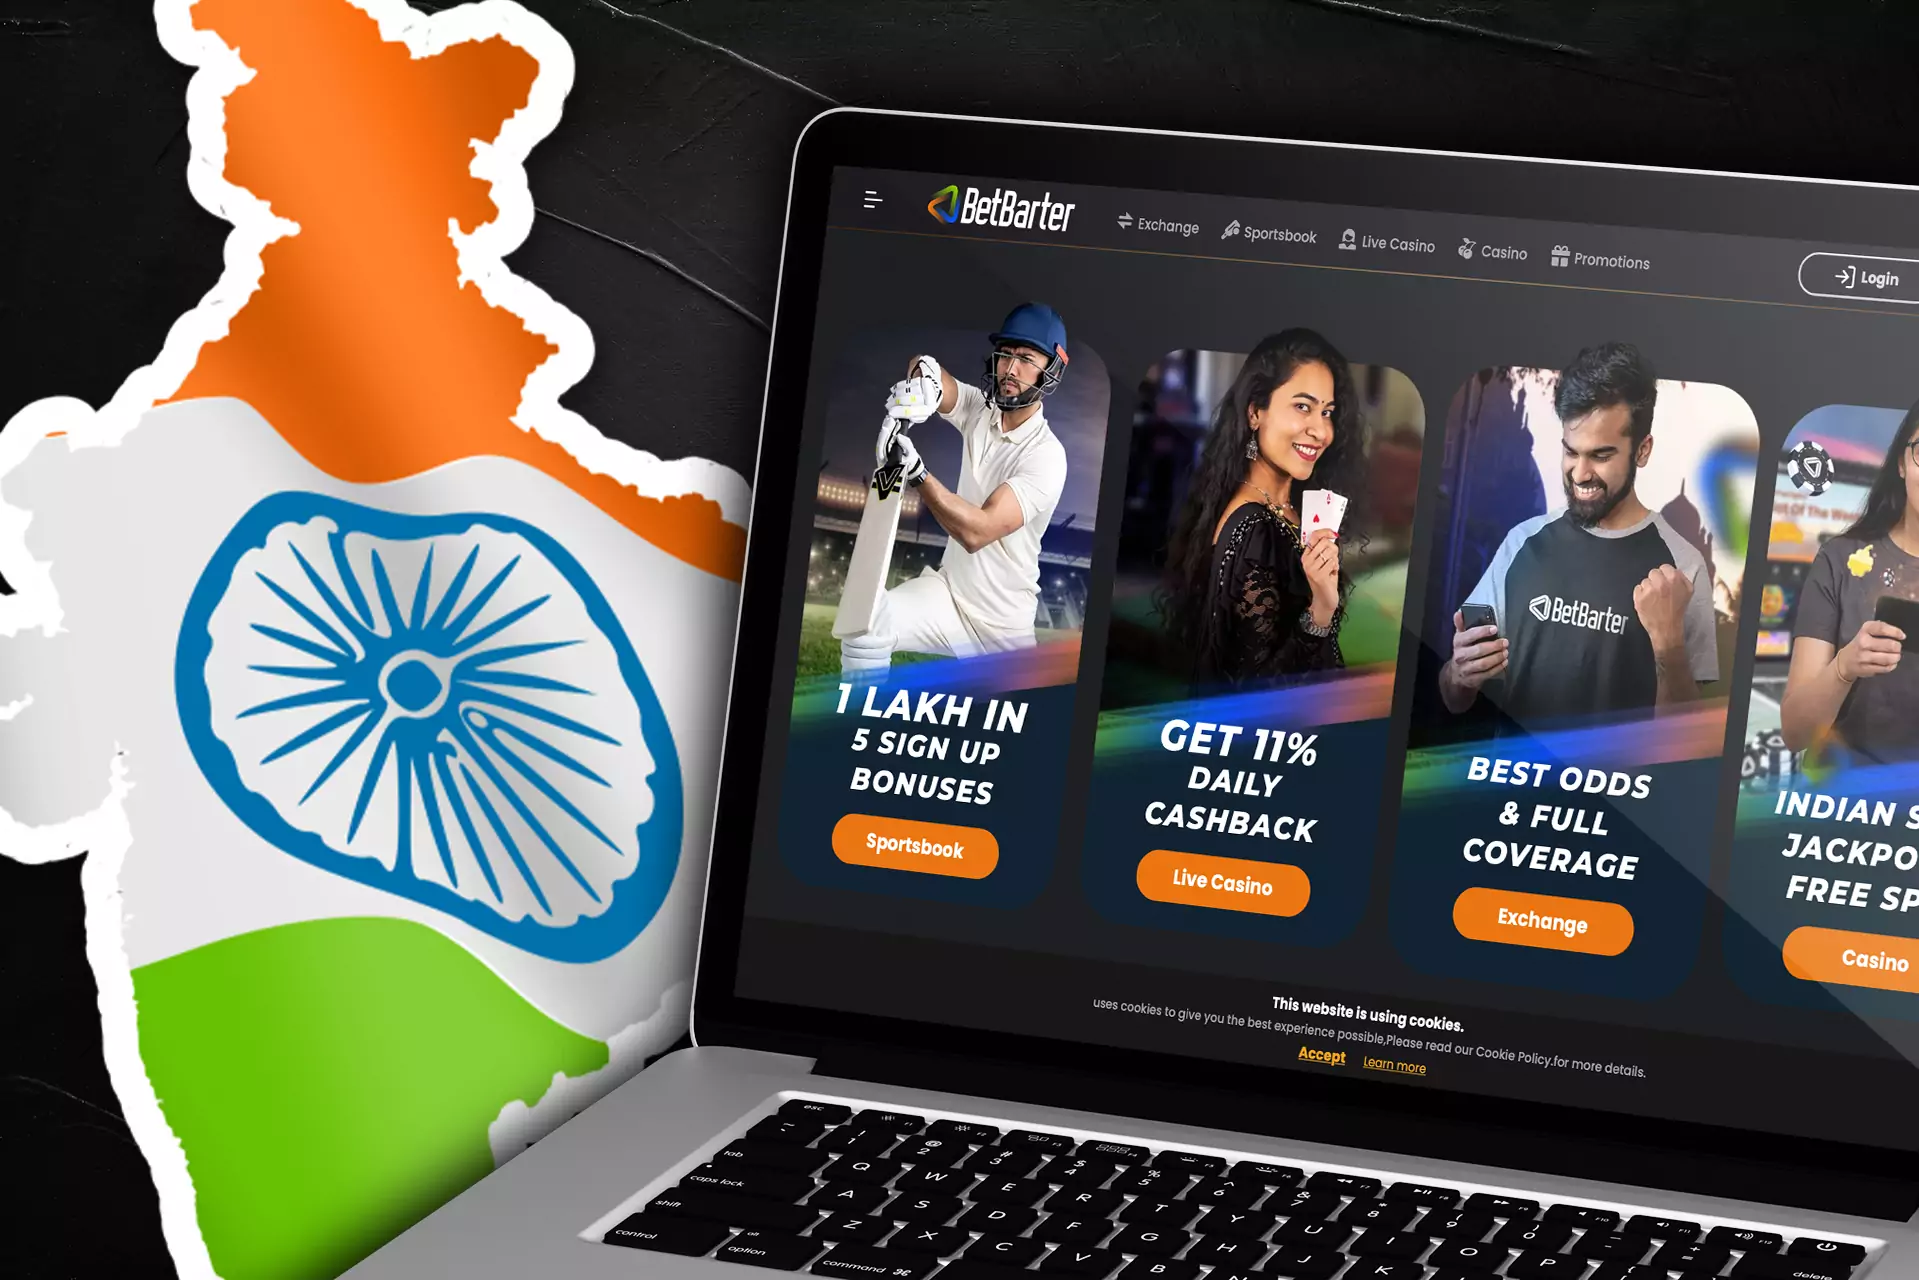 You can place bets on Betbarter online from India.